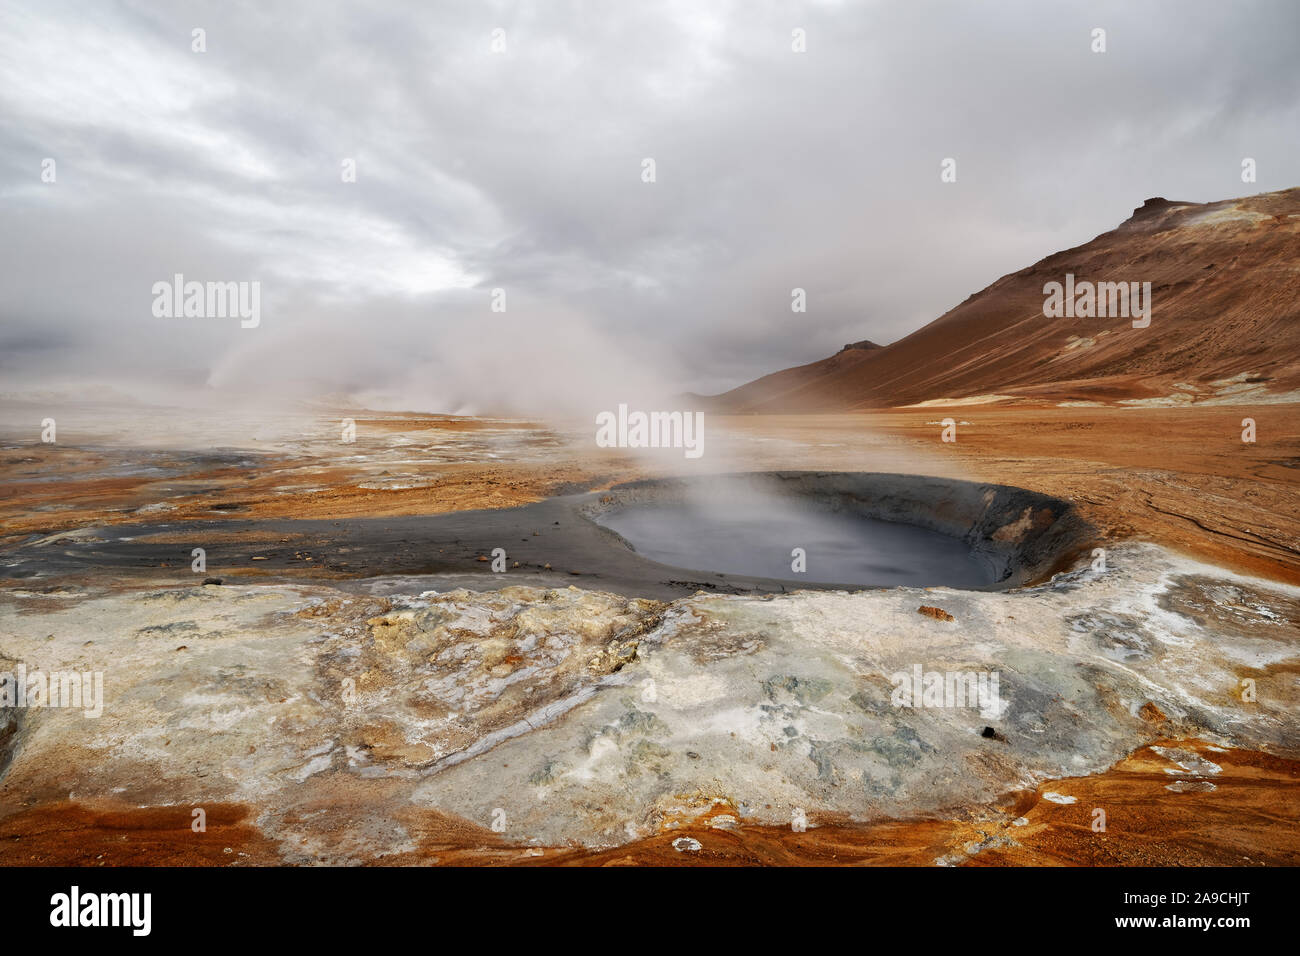 Wide volcanic landscape with a small mud crater and steam blown sideways by the wind, bright natural colours with red tones, evening light, partly clo Stock Photo